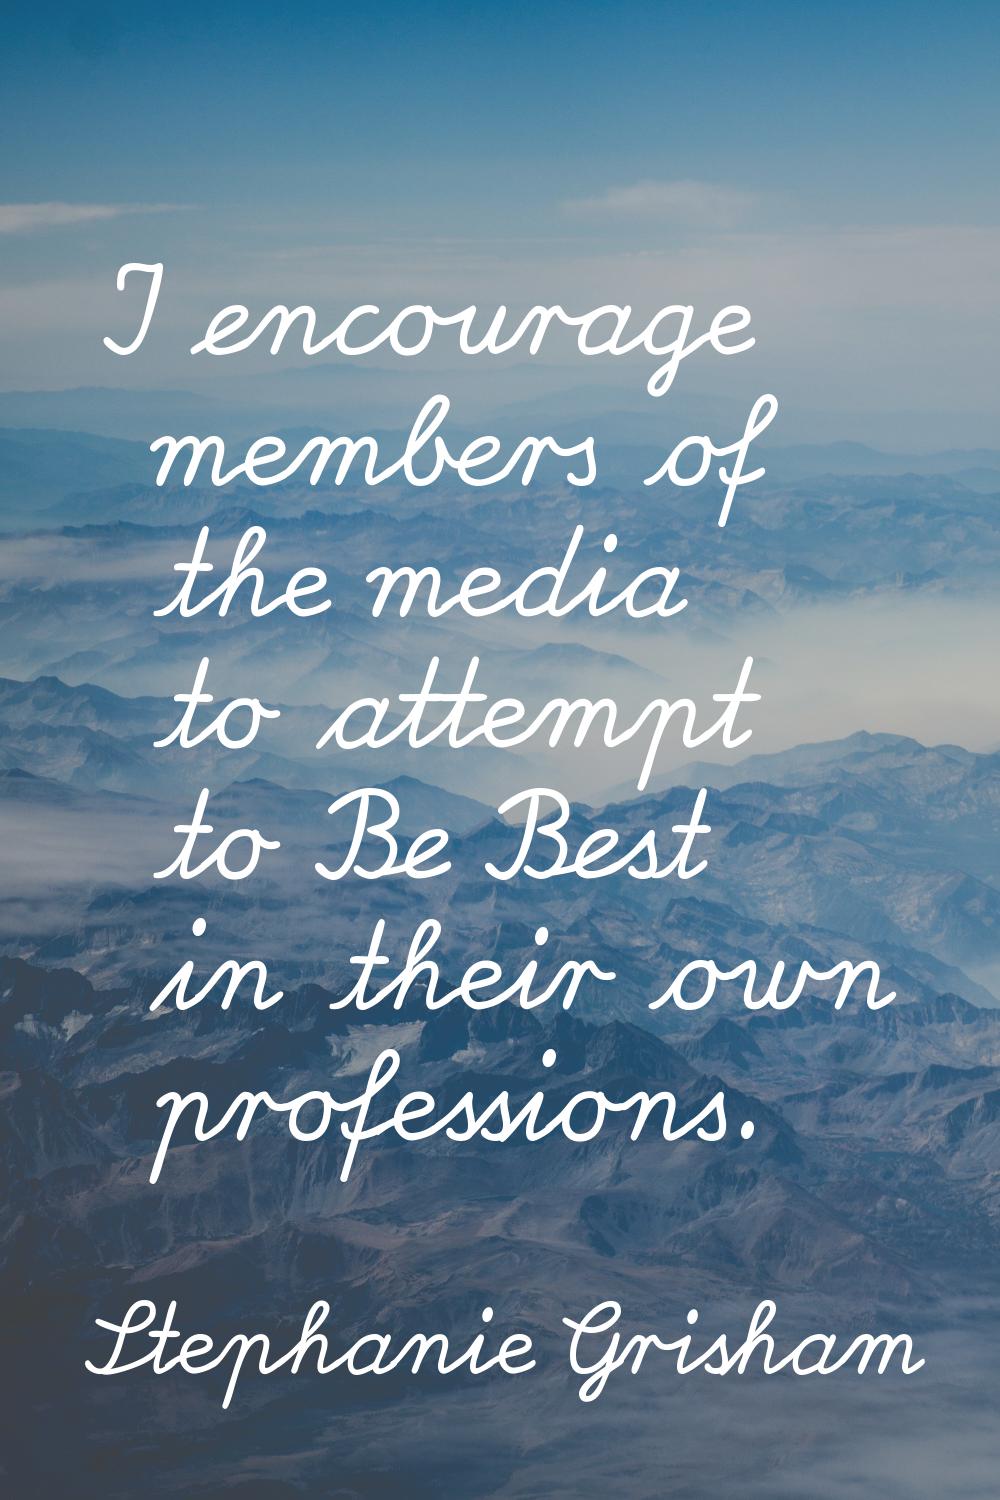 I encourage members of the media to attempt to Be Best in their own professions.